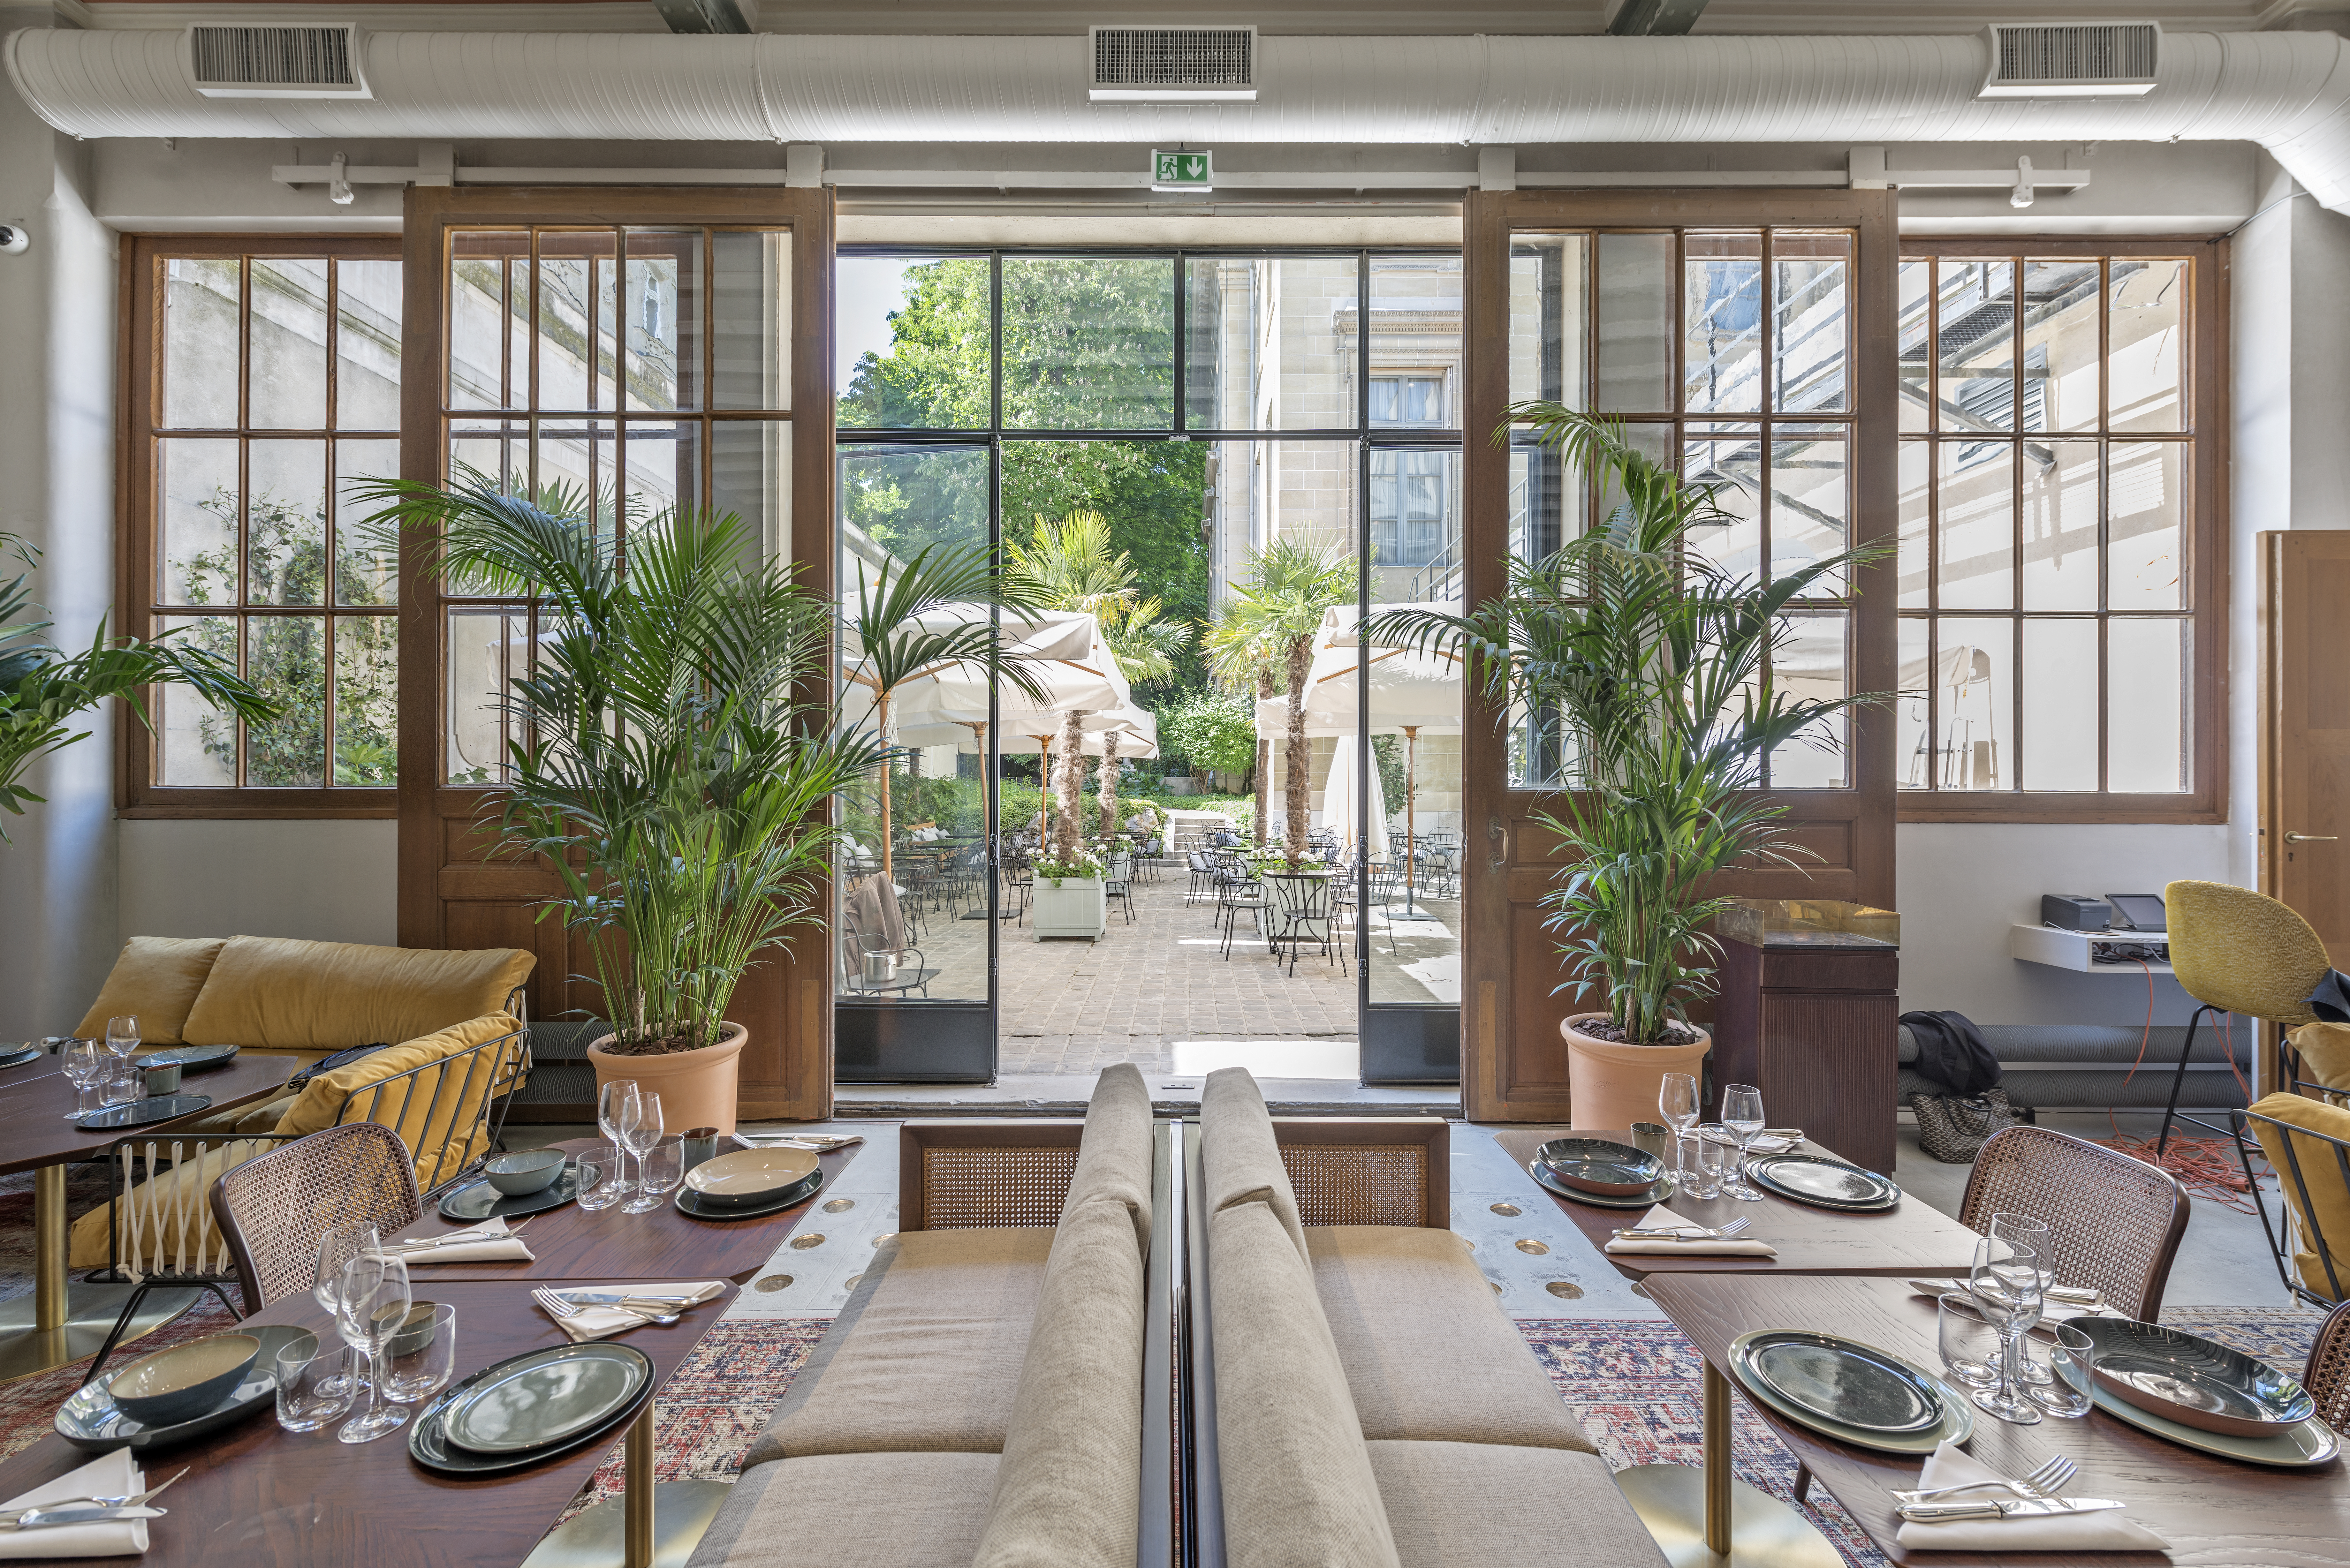 Le Camondo - indoors and outdoors